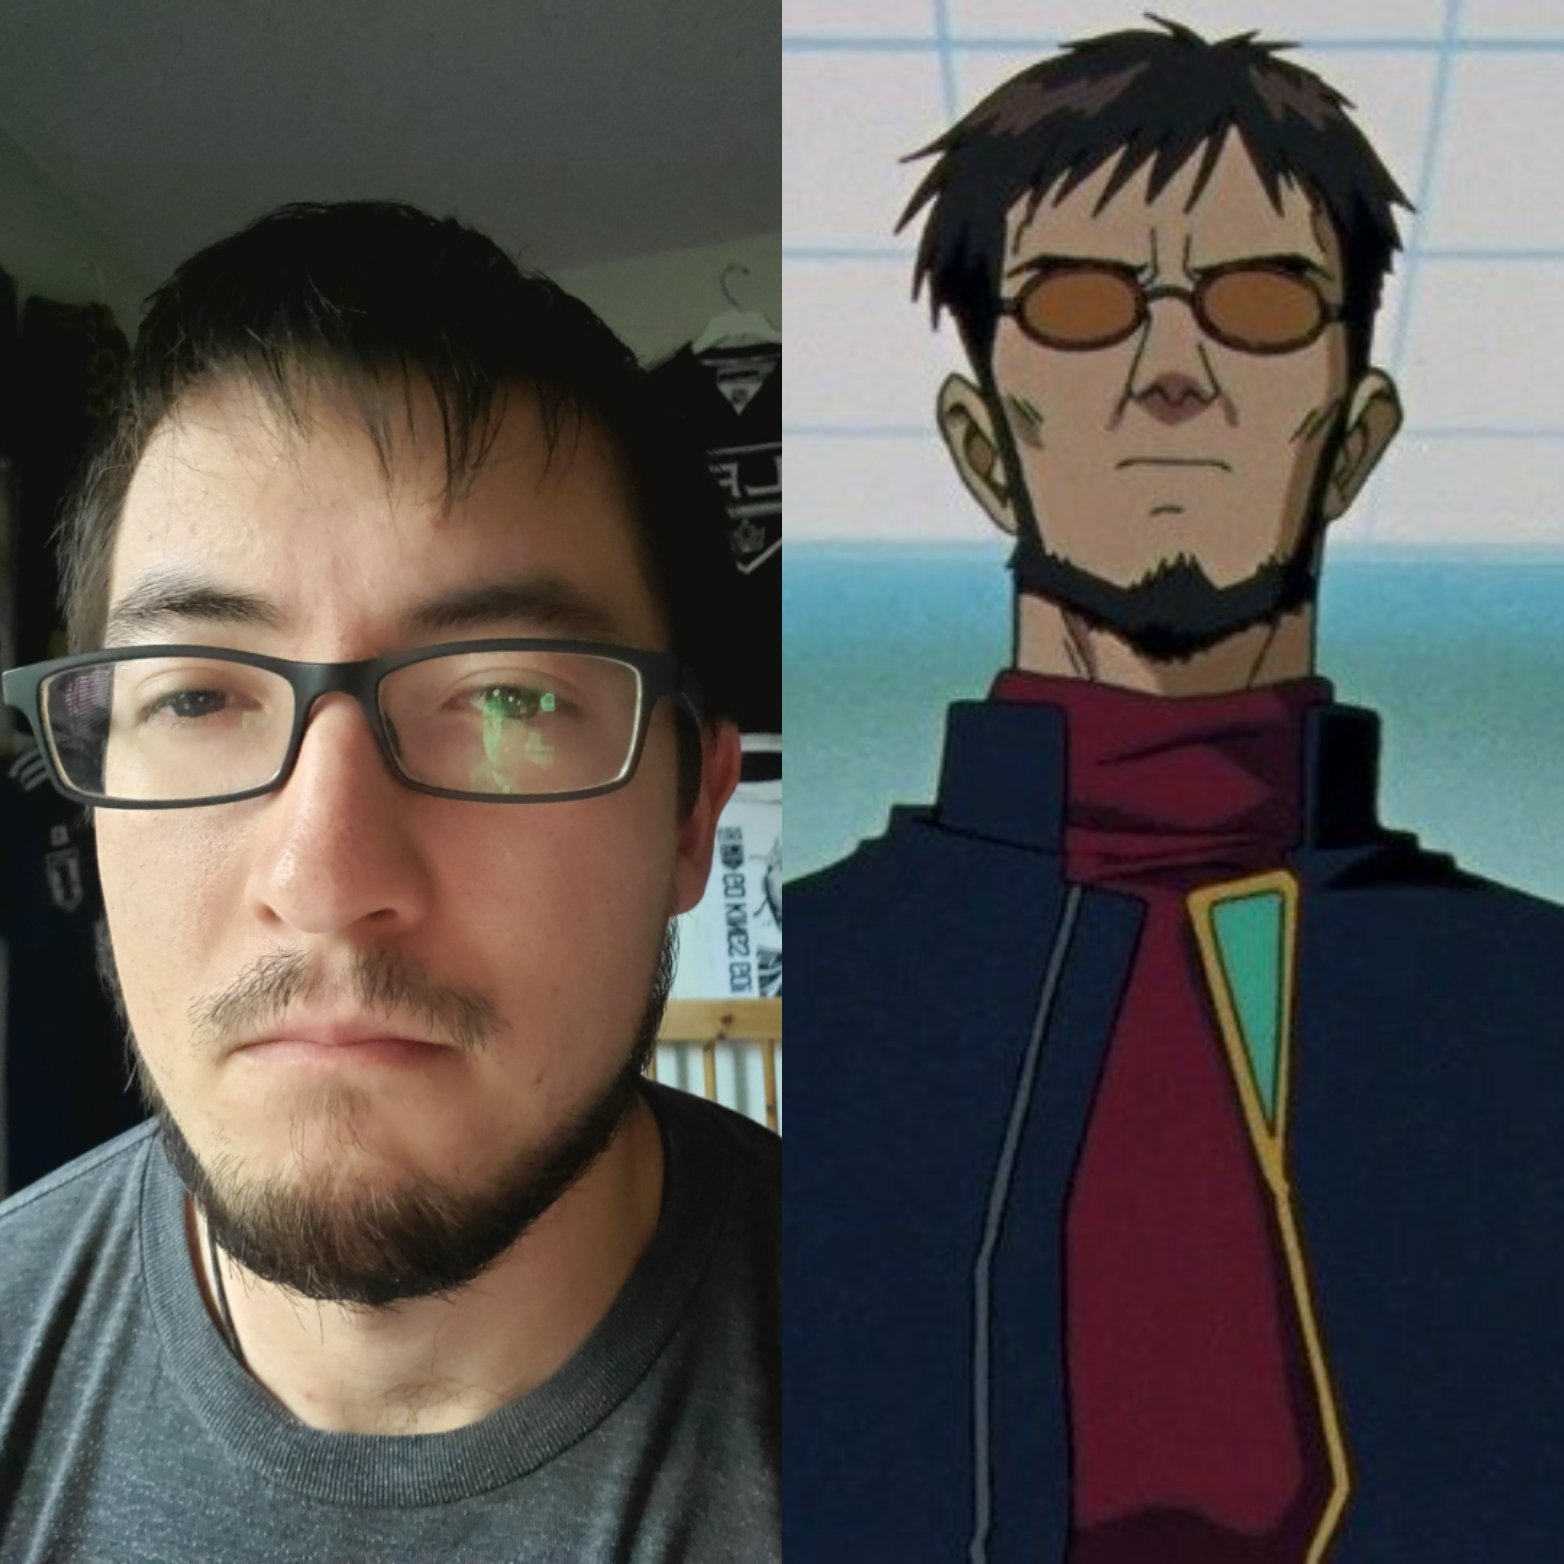 “Starting to look a little more like Gendo Ikari everyday. 
...